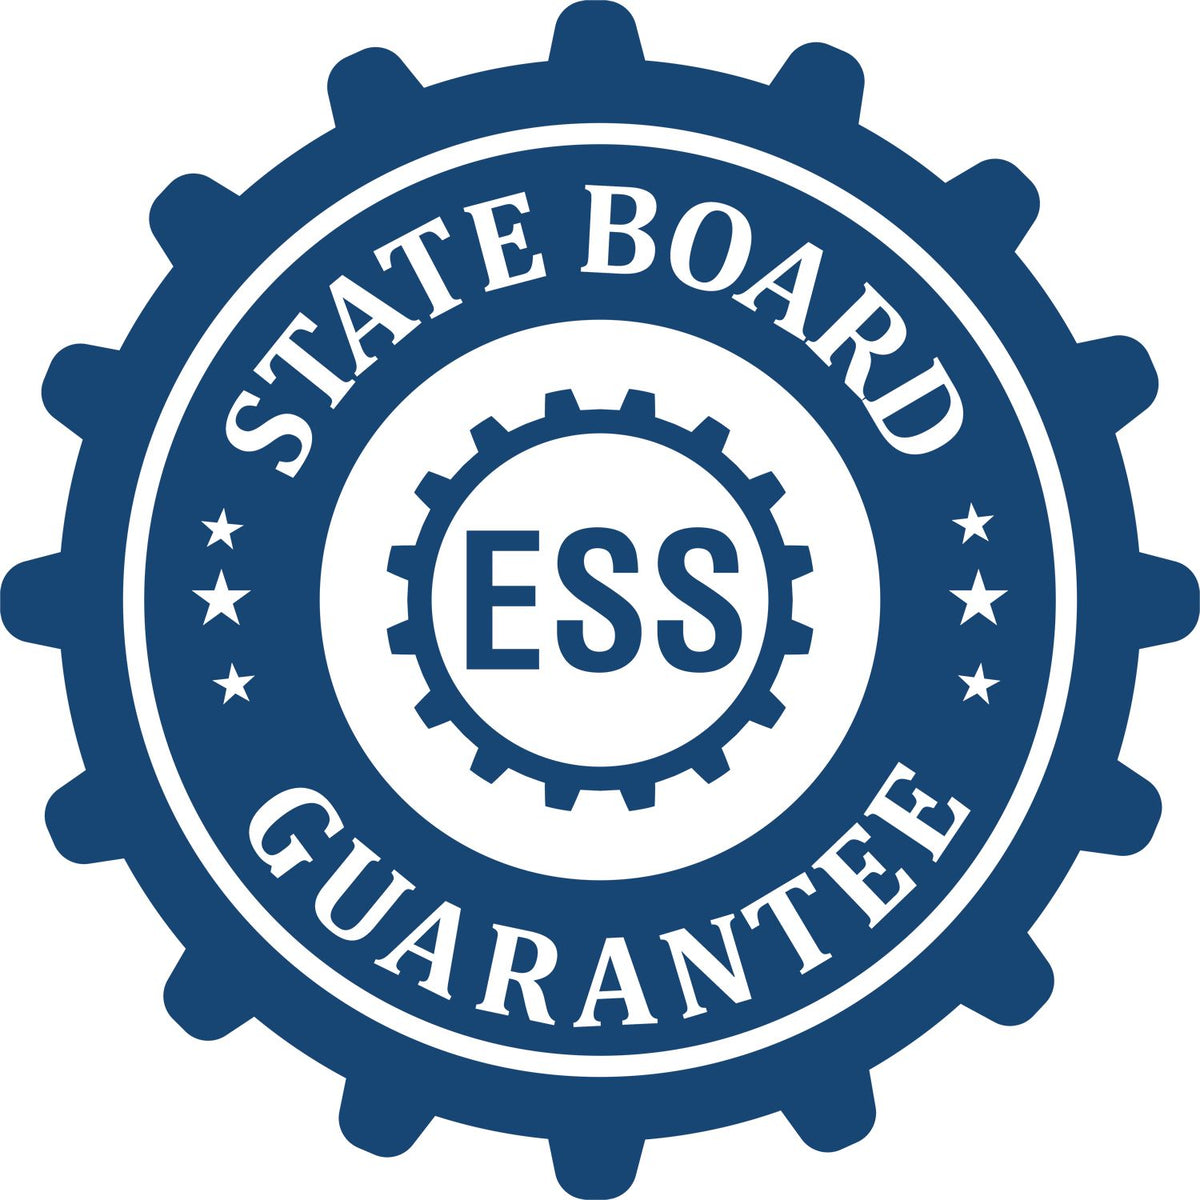 An emblem in a gear shape illustrating a state board guarantee for the Wooden Handle Washington Rectangular Notary Public Stamp product.